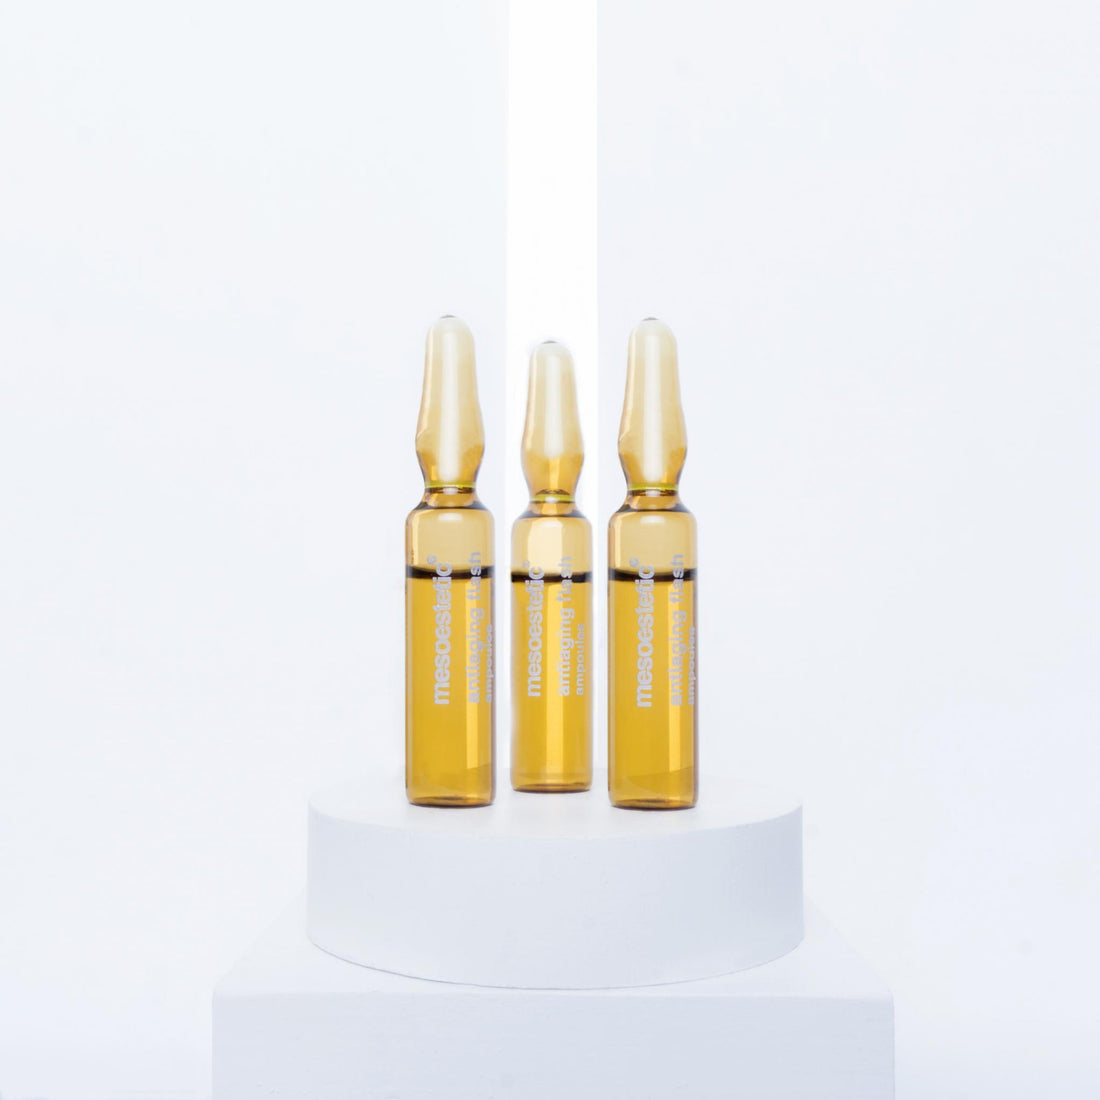 Mesoestetic Antiaging Flash Ampoules 10x2ml